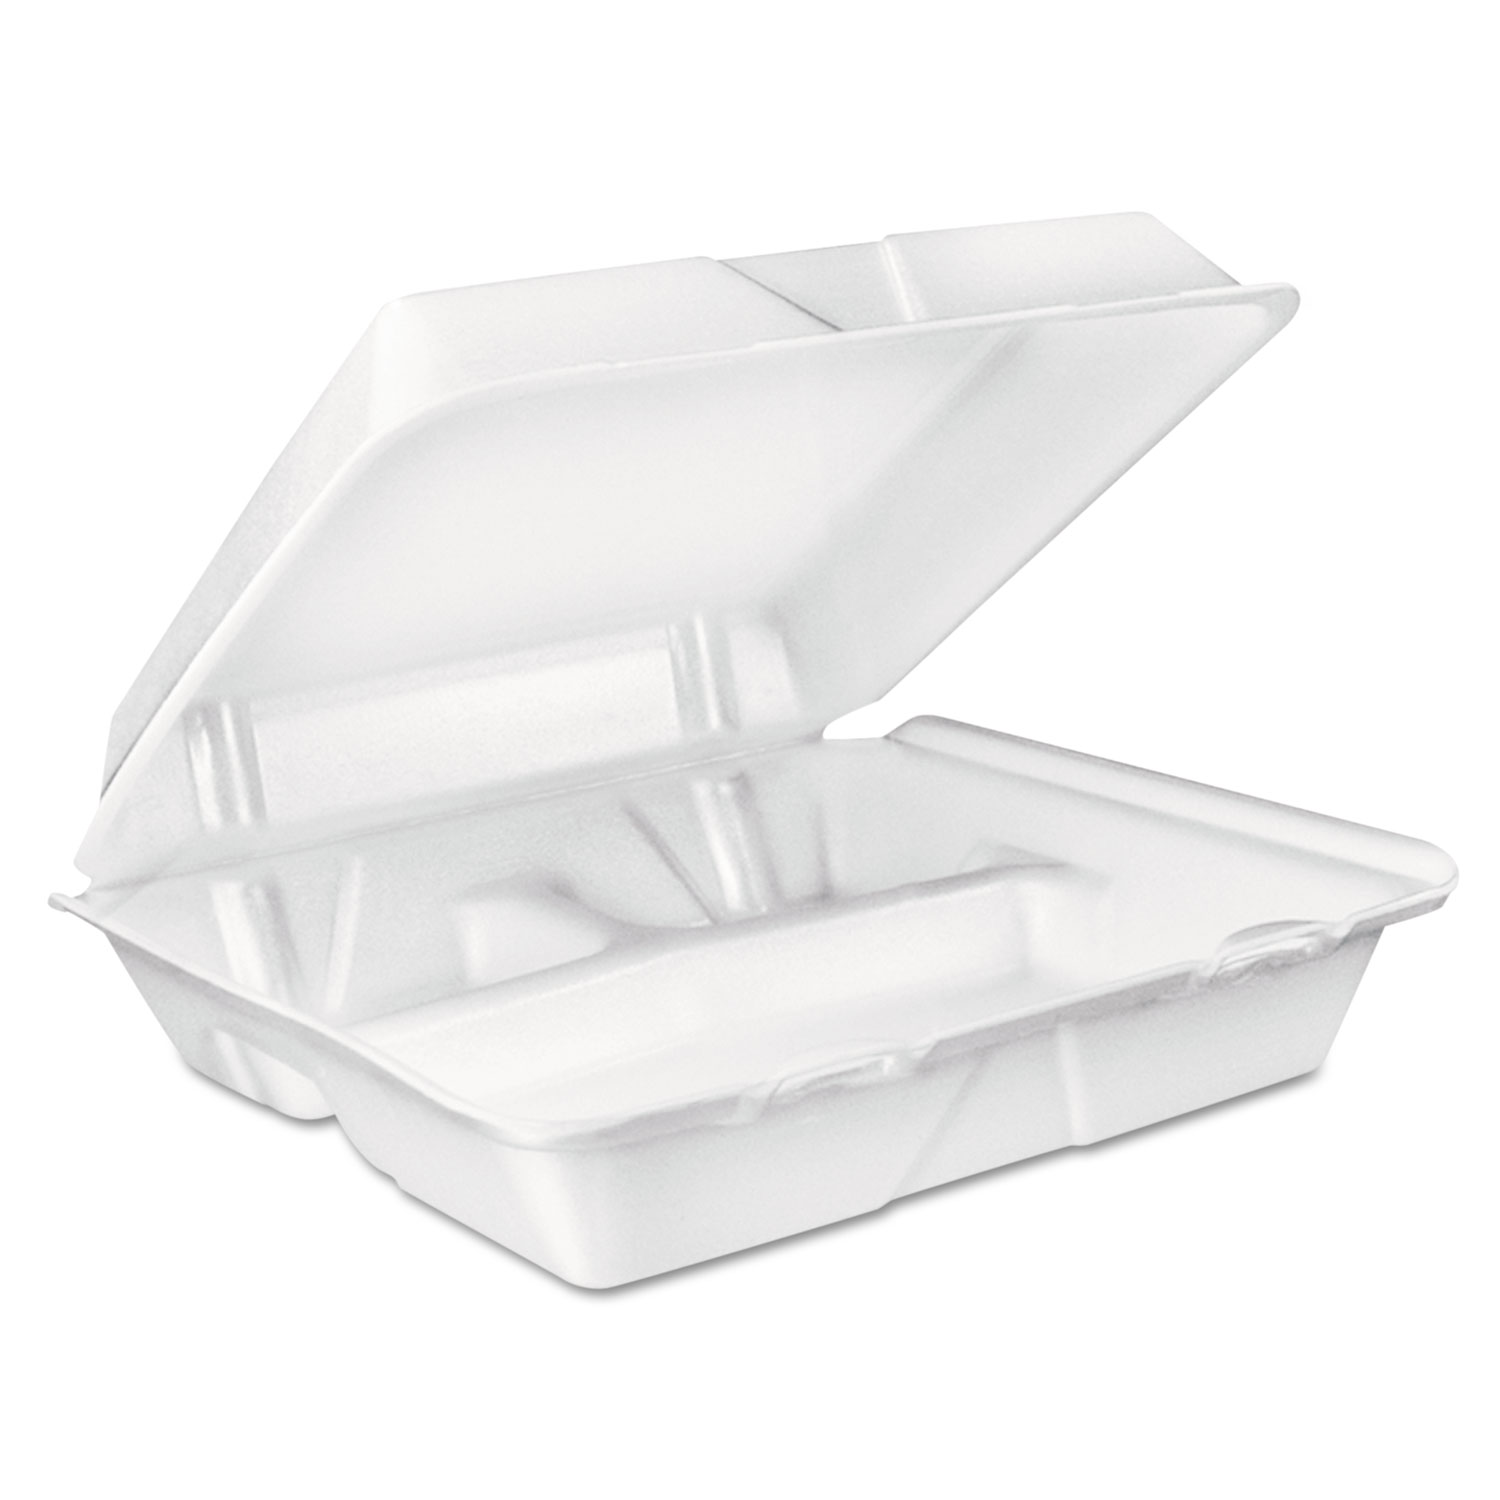  Dart 90HT3R Large Foam Carryout, Food Container, 3-Compartment, White, 9-2/5x9x3 (DCC90HT3R) 